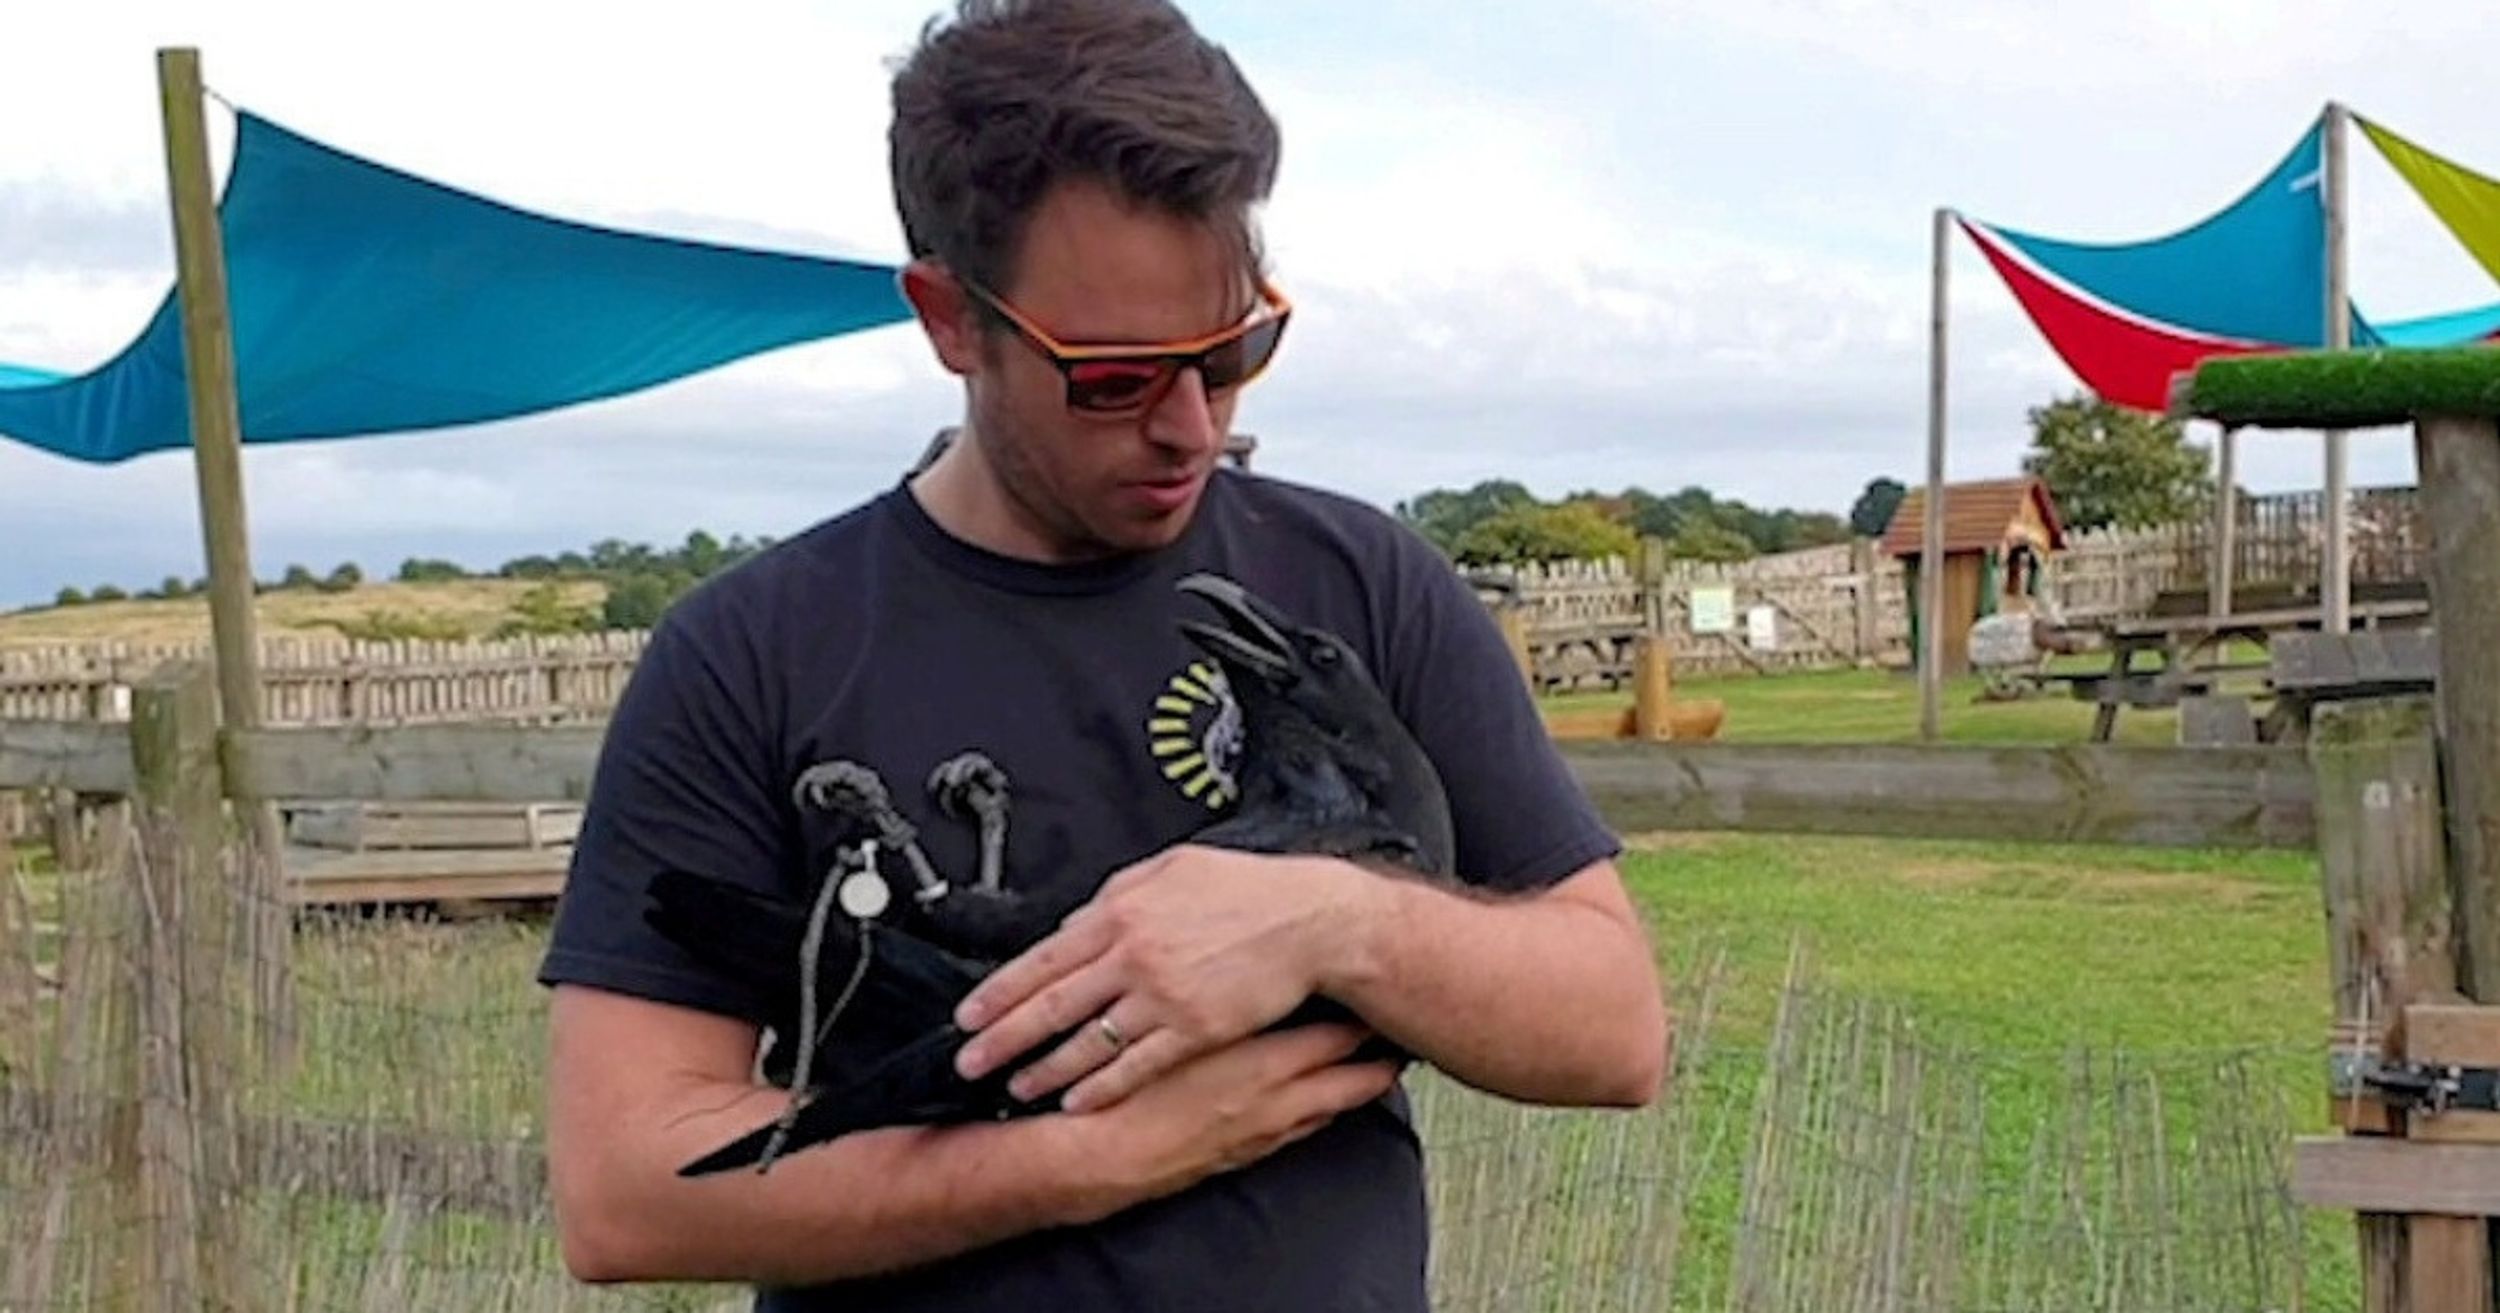 Loki The Overly Affectionate Raven Who Loves To Be Cuddled Is Our Newest Internet Obsession